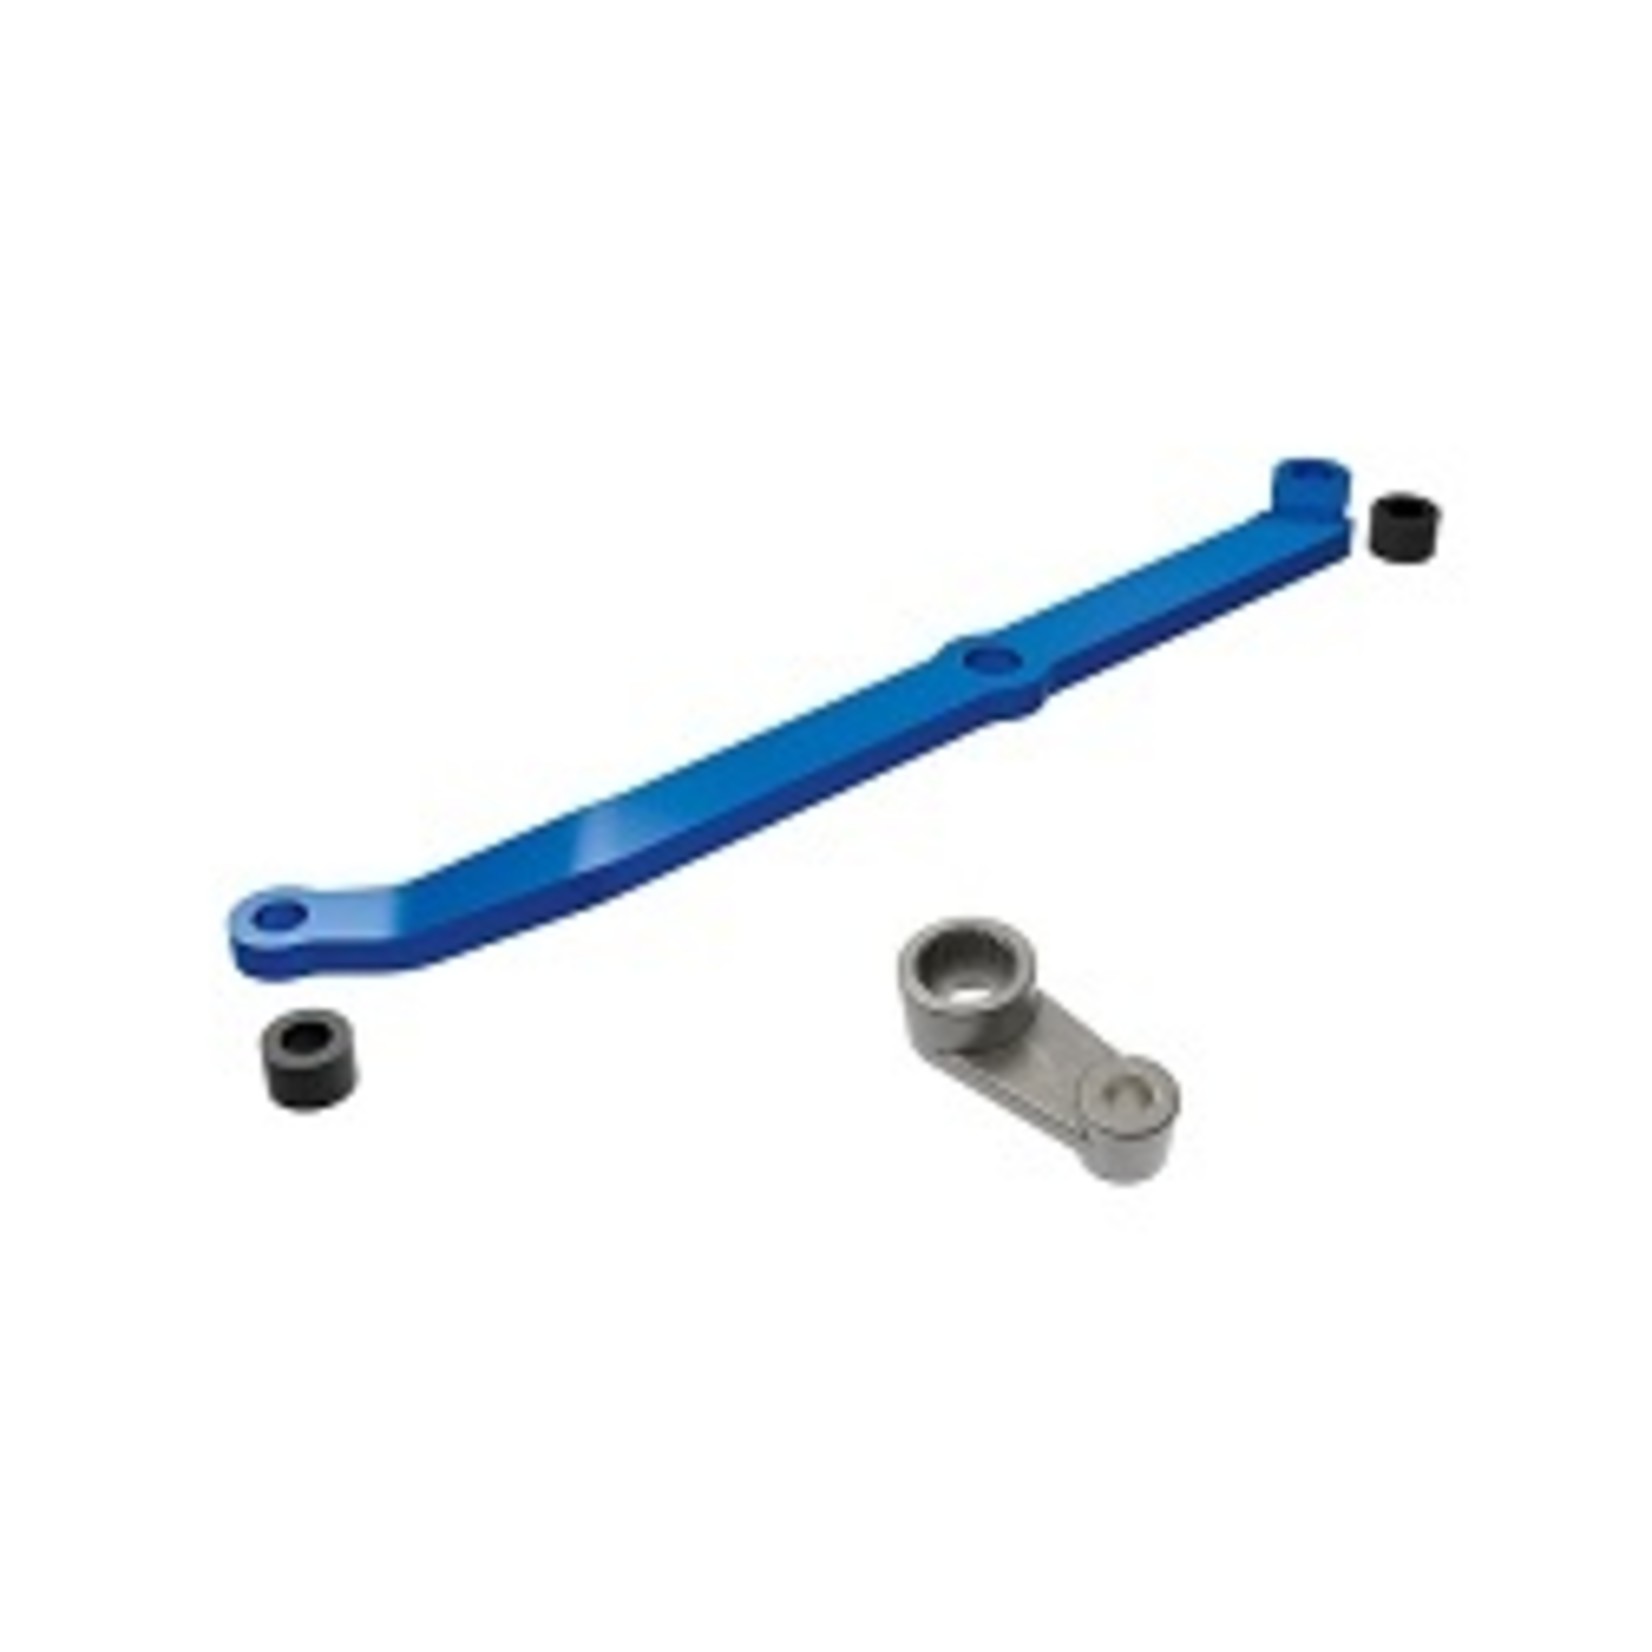 Traxxas 9748-BLUE  Steering link, 6061-T6 aluminum (blue-anodized)/ servo horn, metal/ spacers (2)/ 3x6mm CCS (with threadlock) (1)/ 2.5x7mm SS (with threadlock) (1)